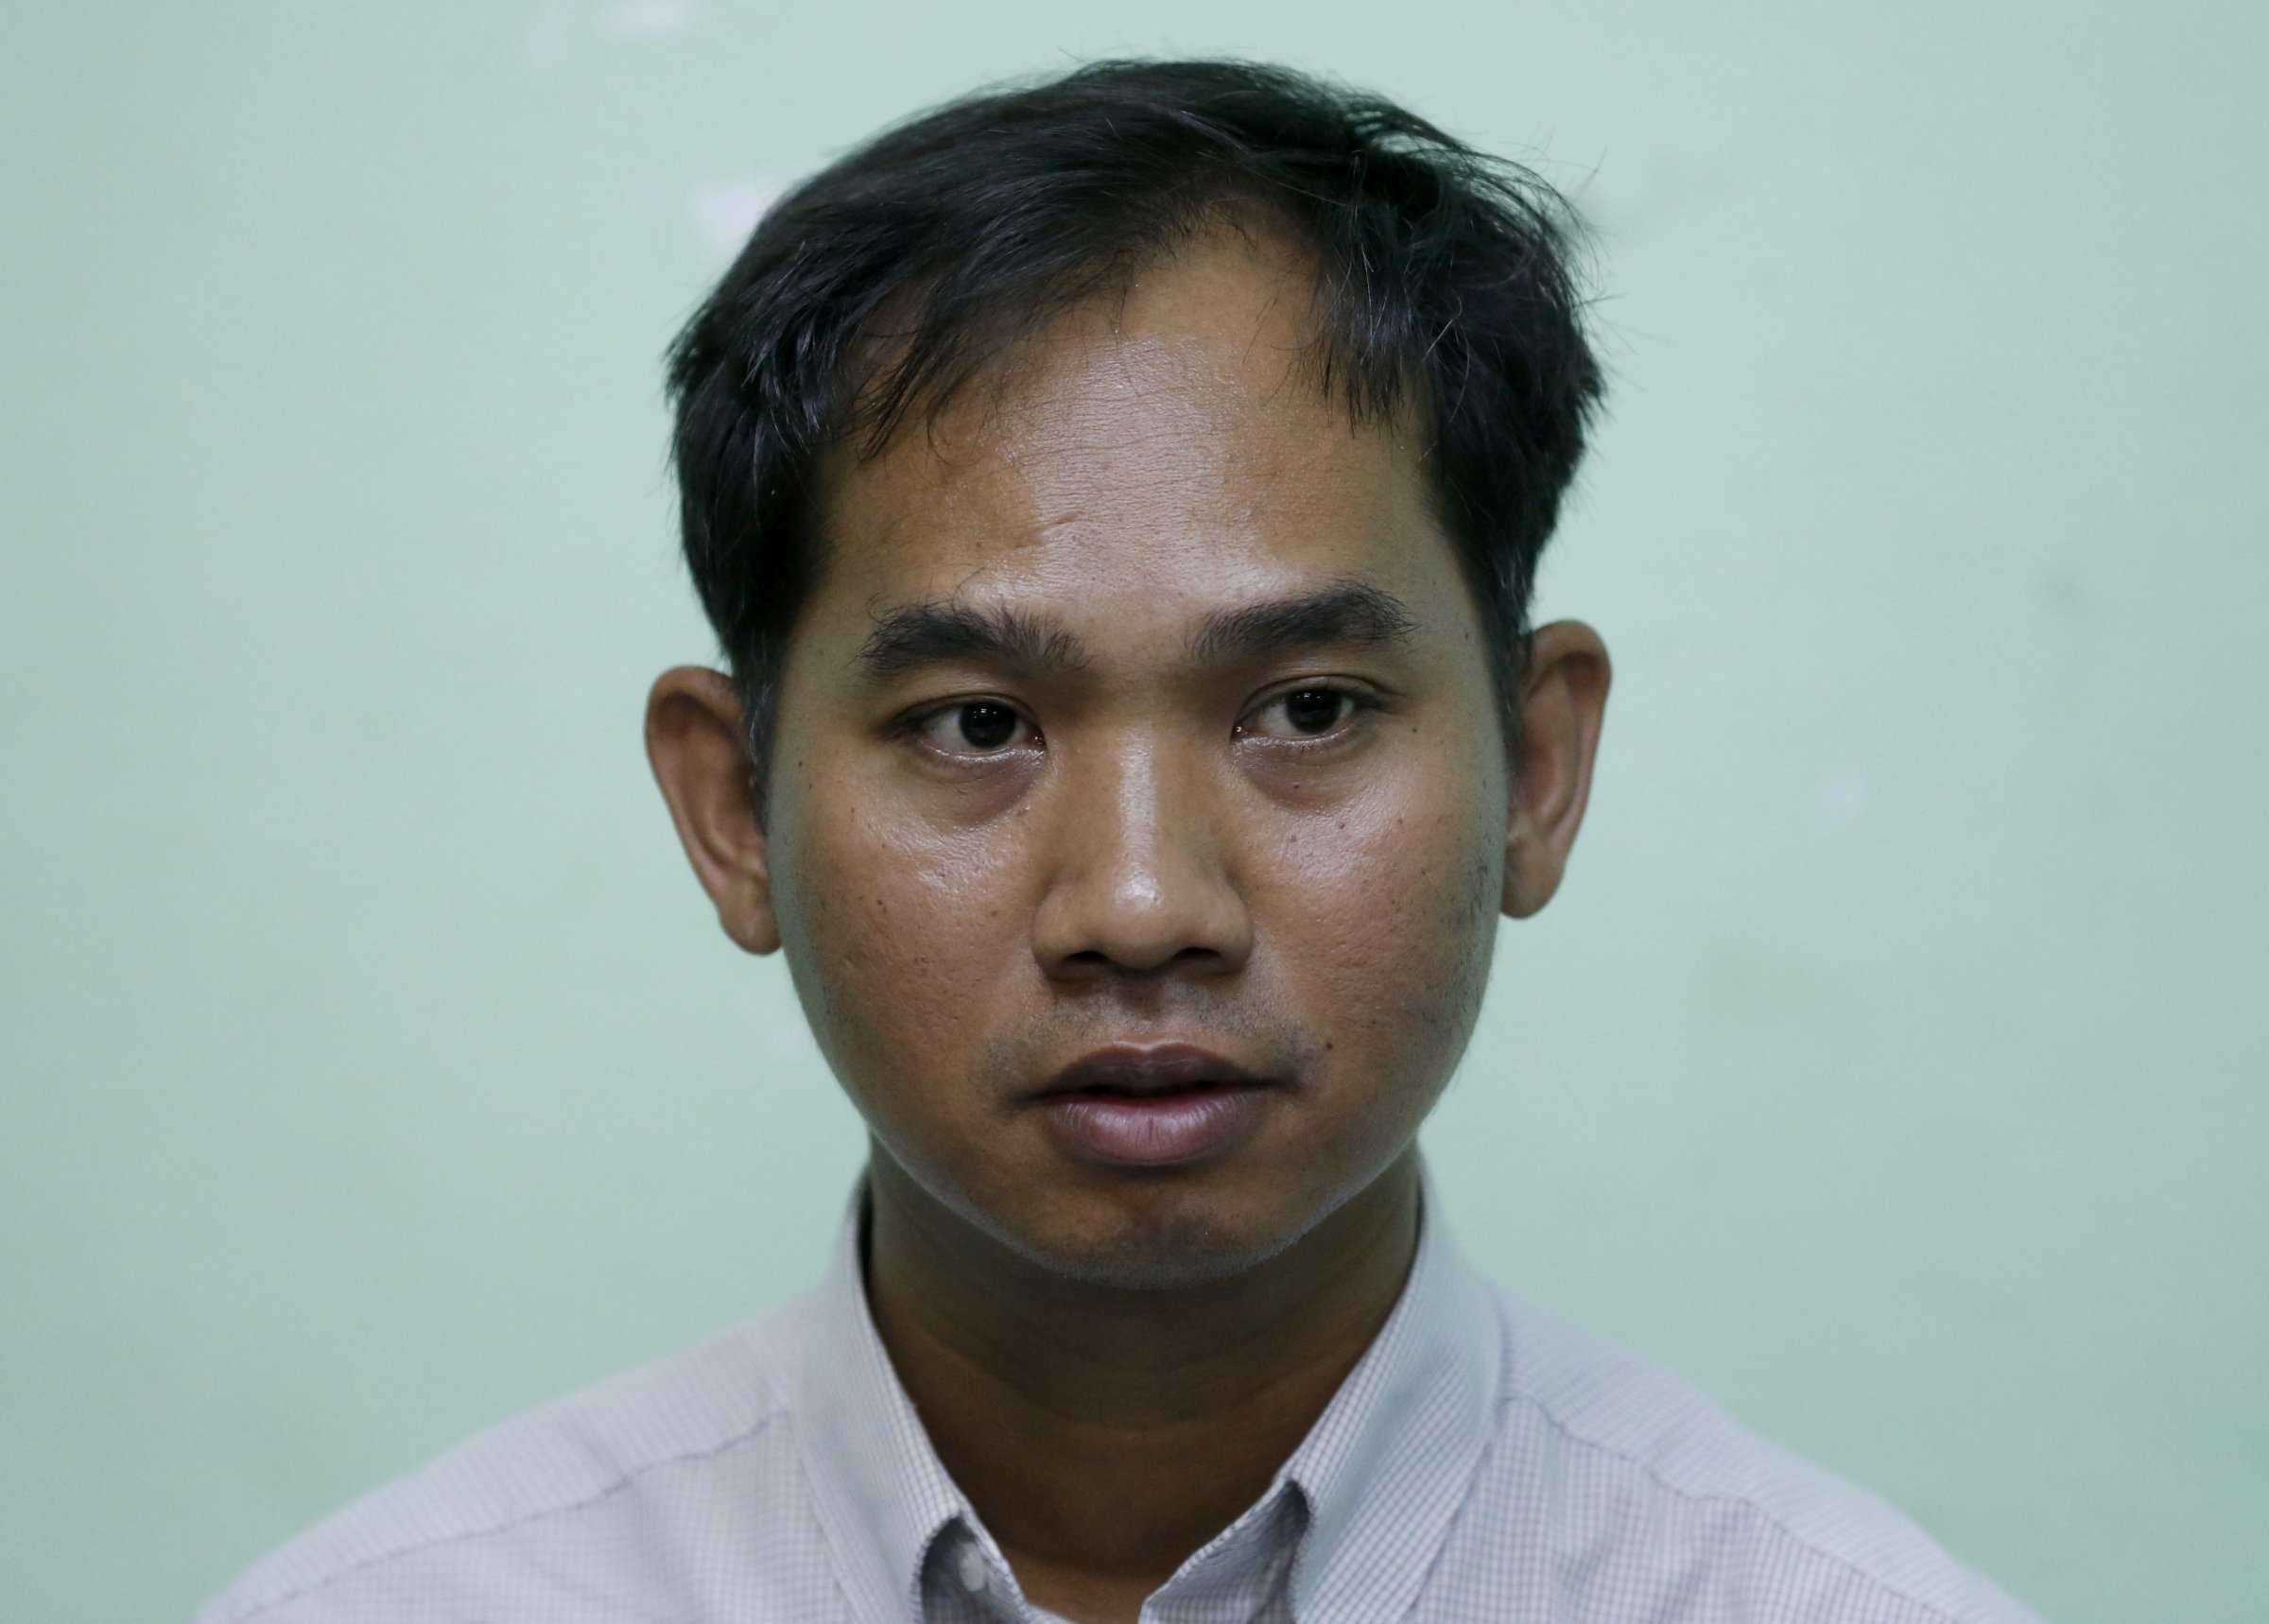 Myanmar Now Chief Editor arrested under section 66(d) of the telecommunications Law